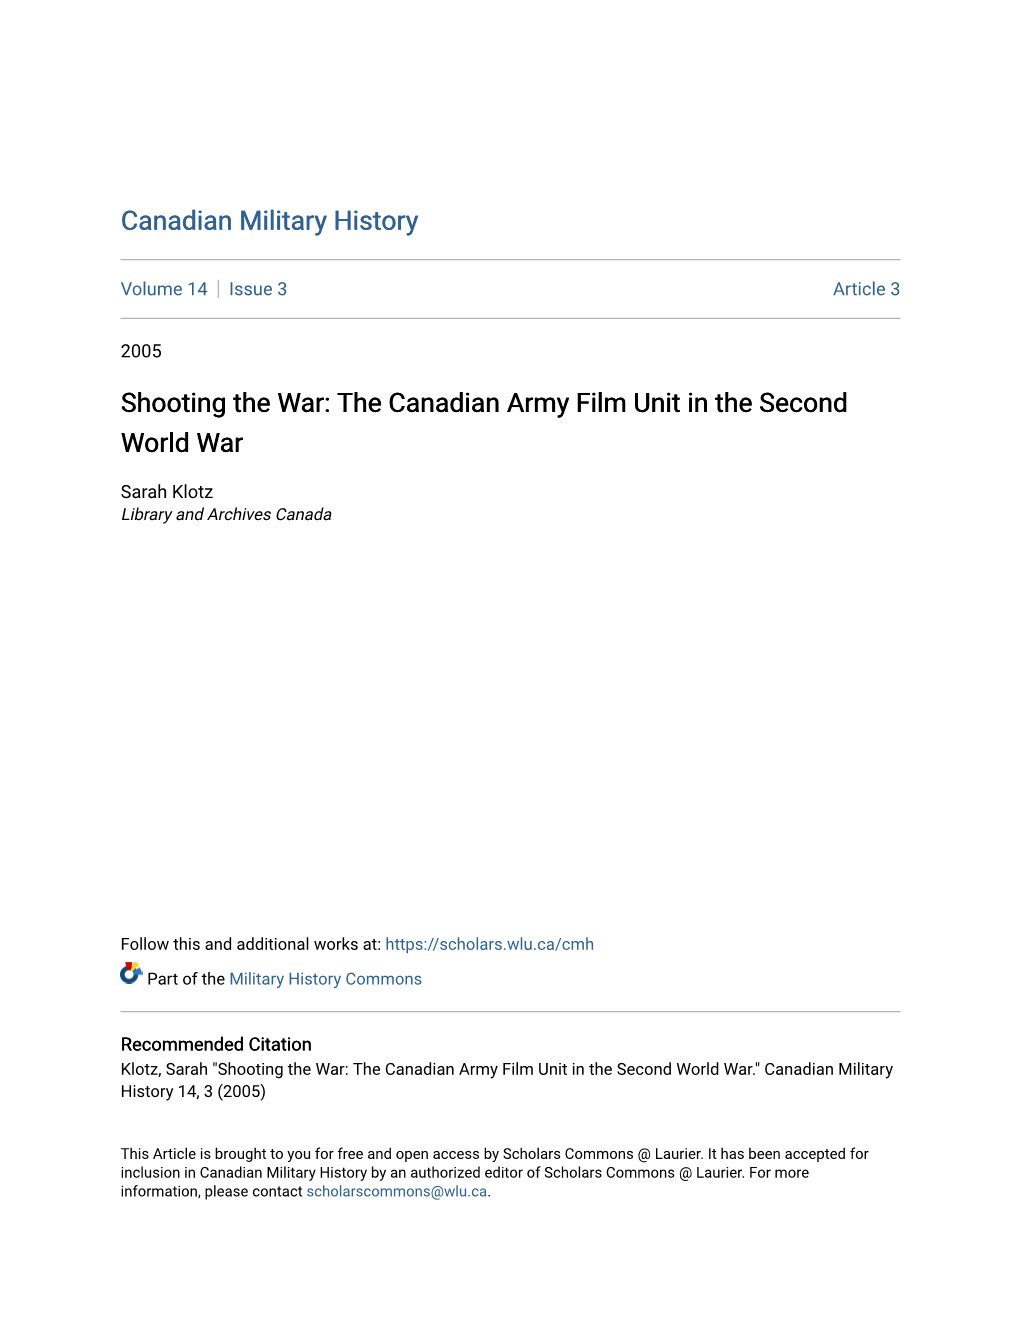 The Canadian Army Film Unit in the Second World War